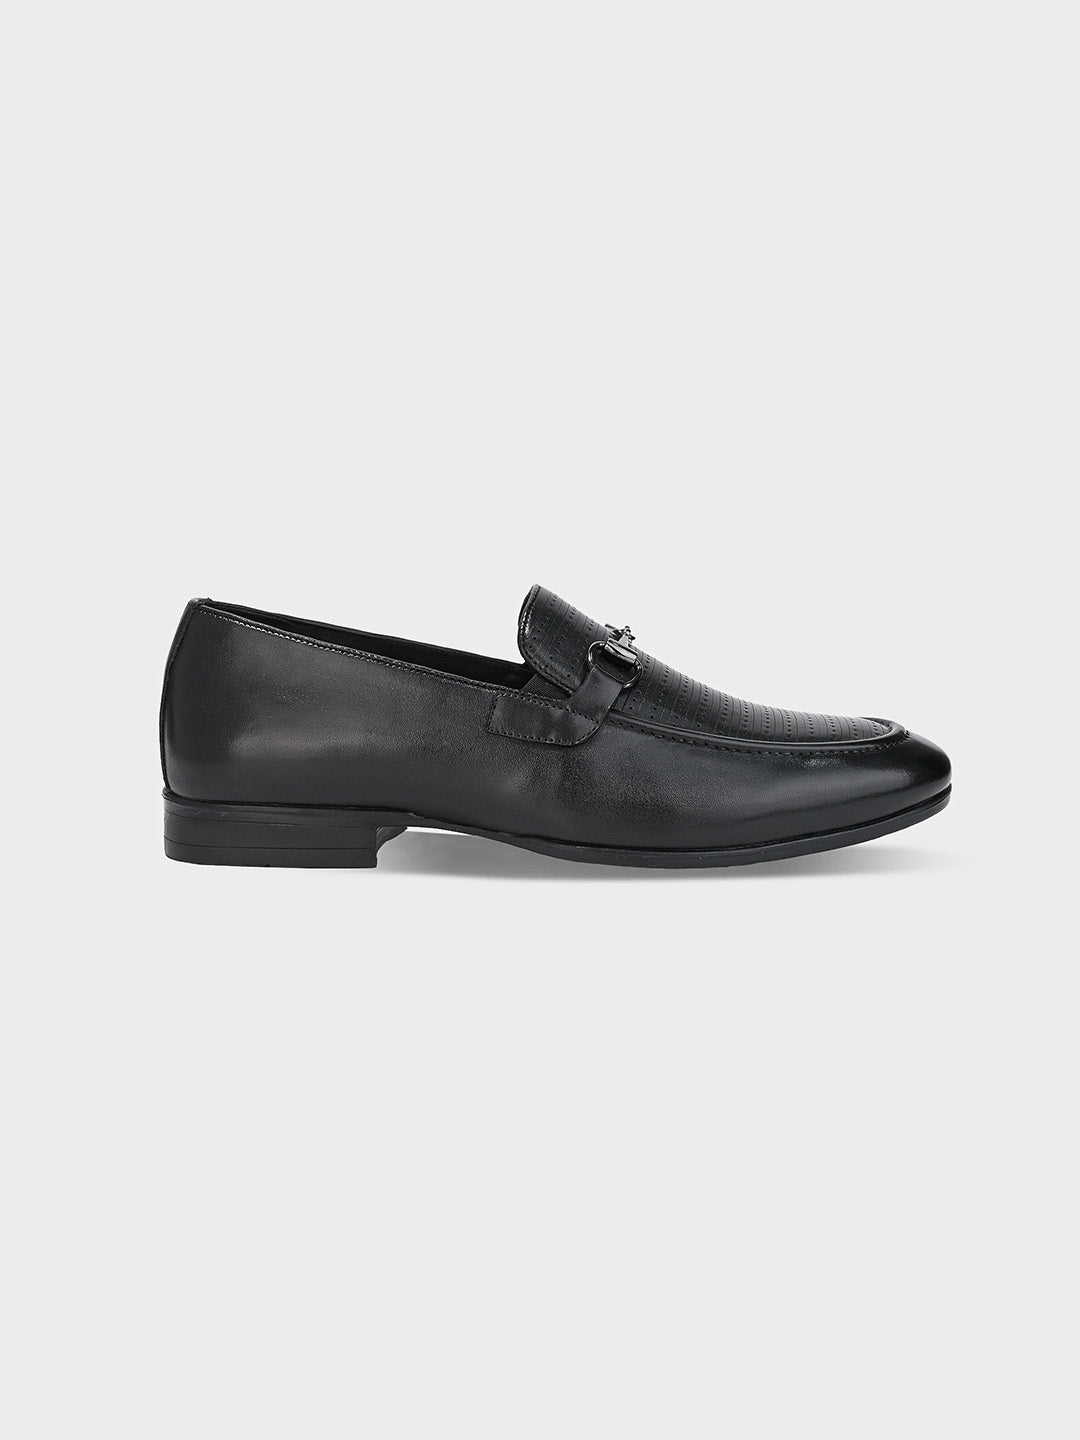 Black Leather Men's Loafer Slip-On Shoes – One8 Select